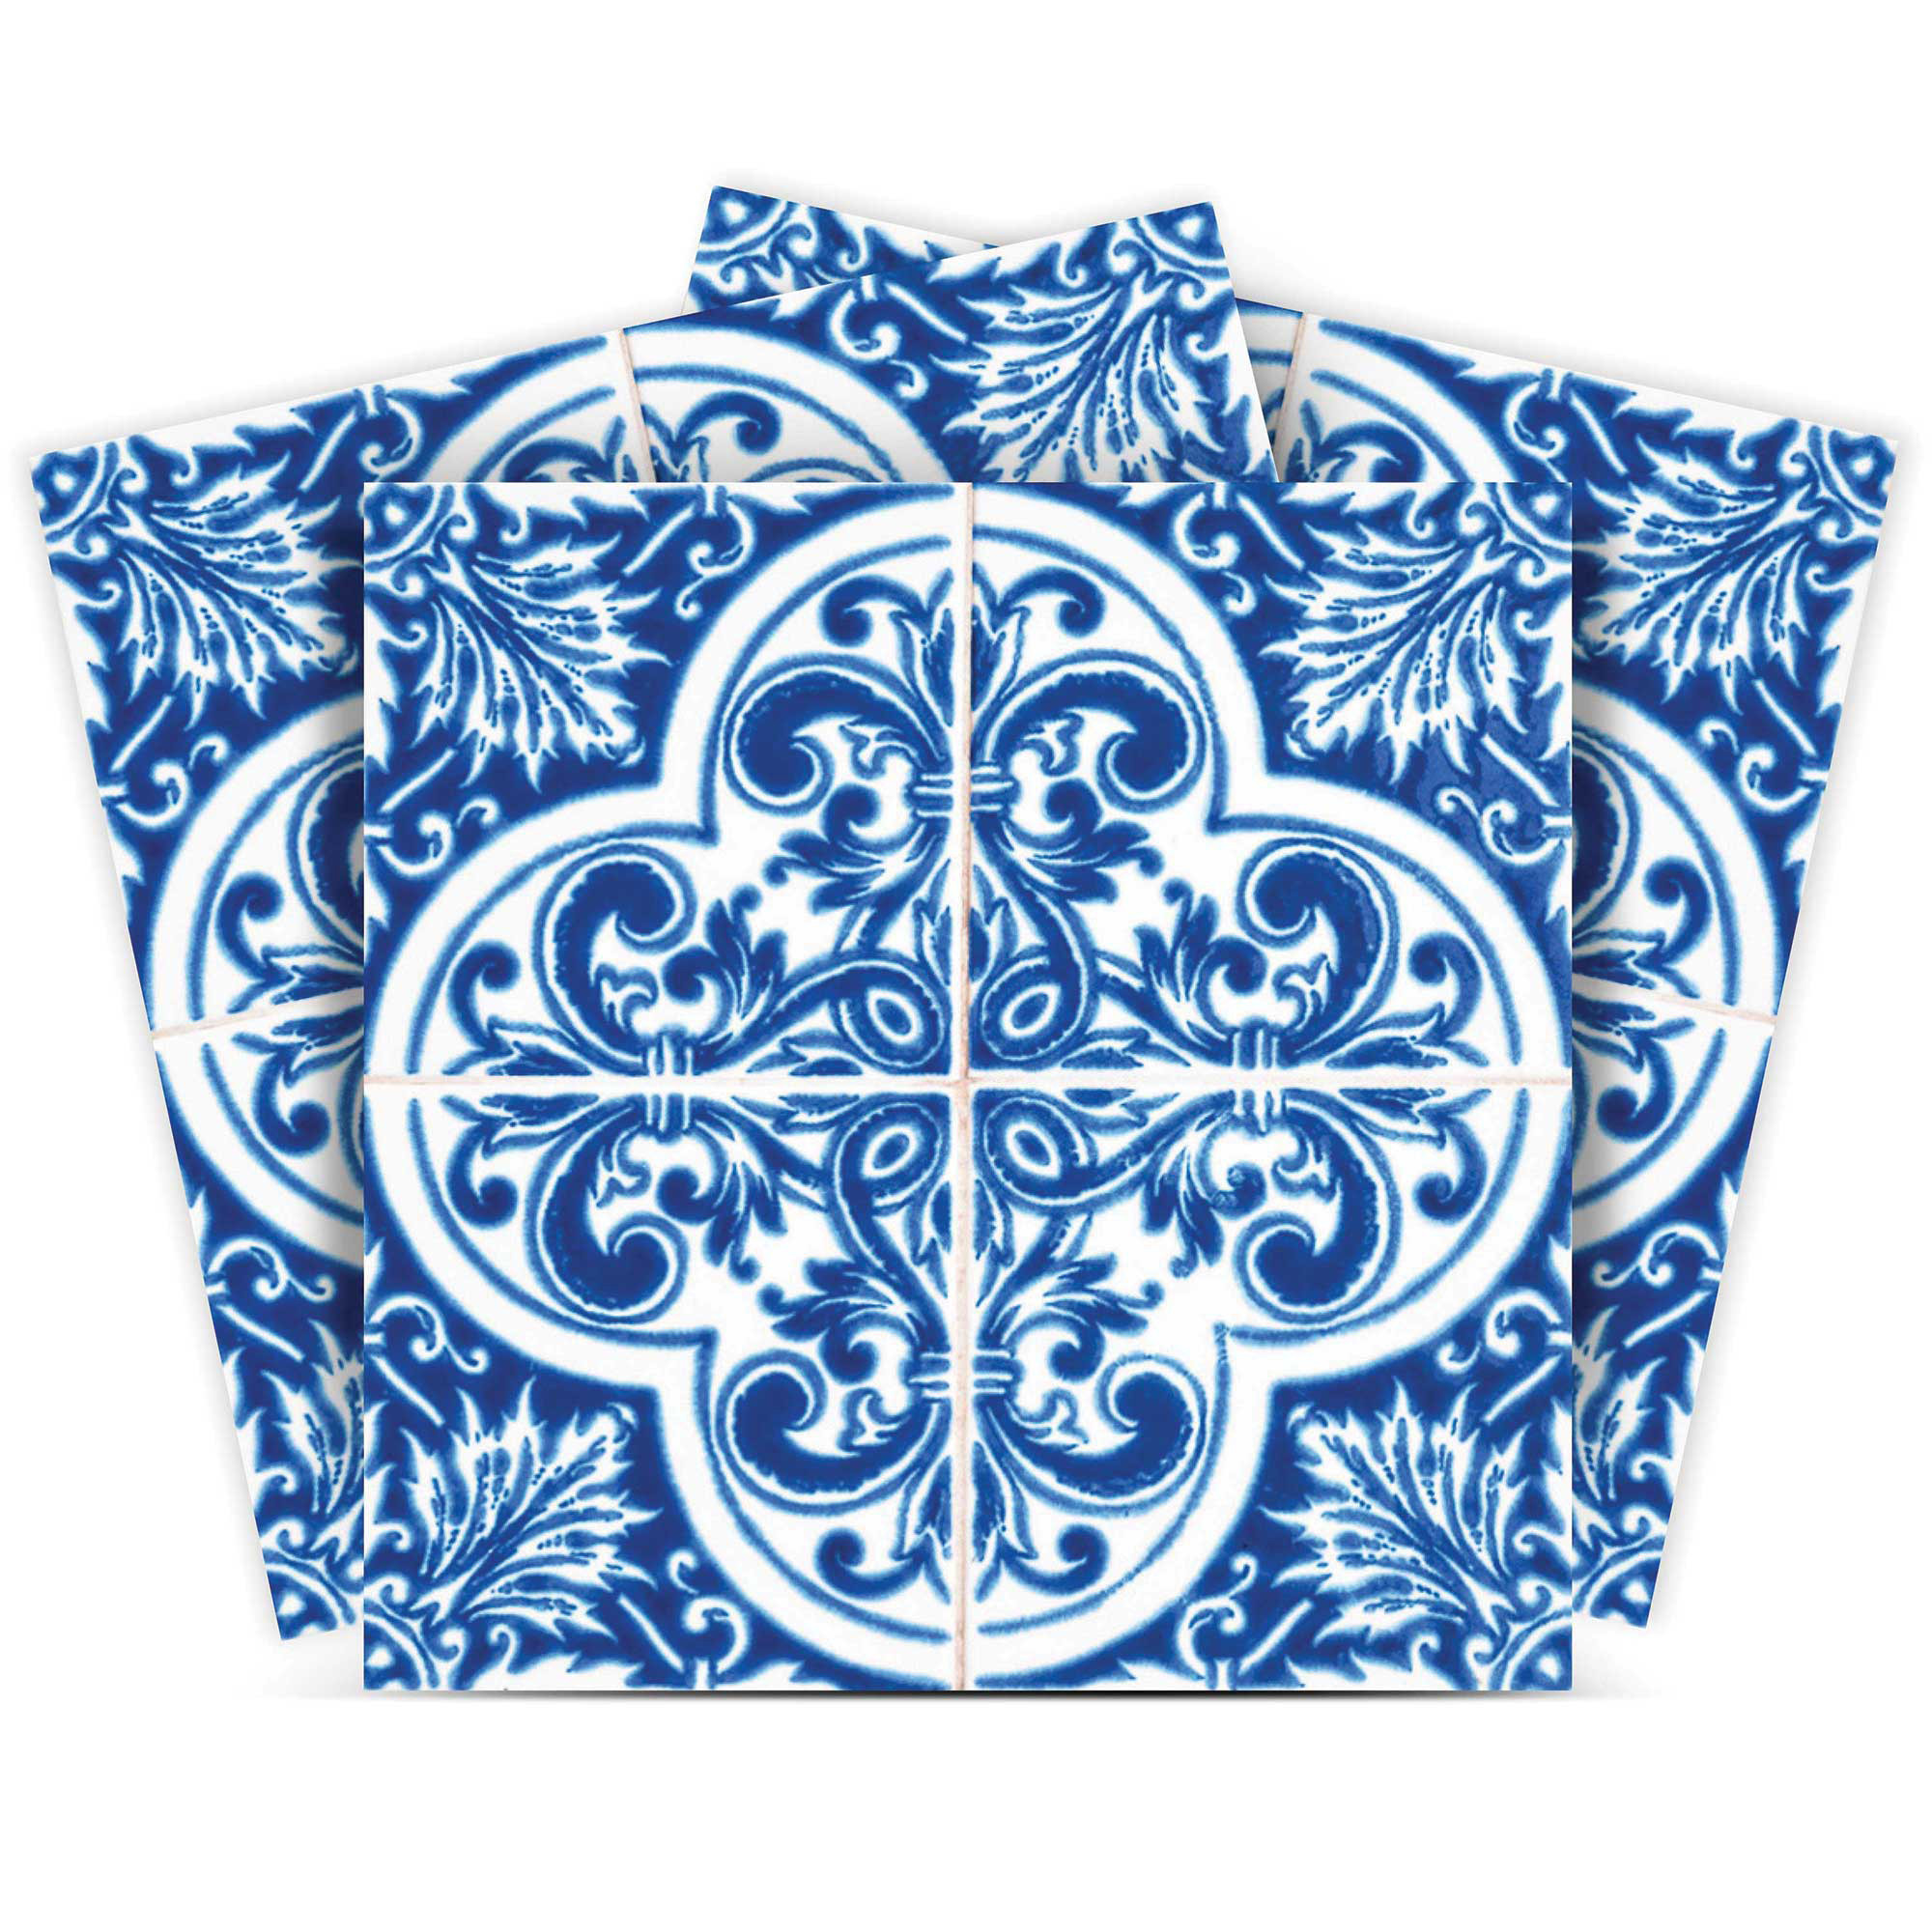 4" X 4" Blue and White Cross Peel And Stick Tiles-400115-1